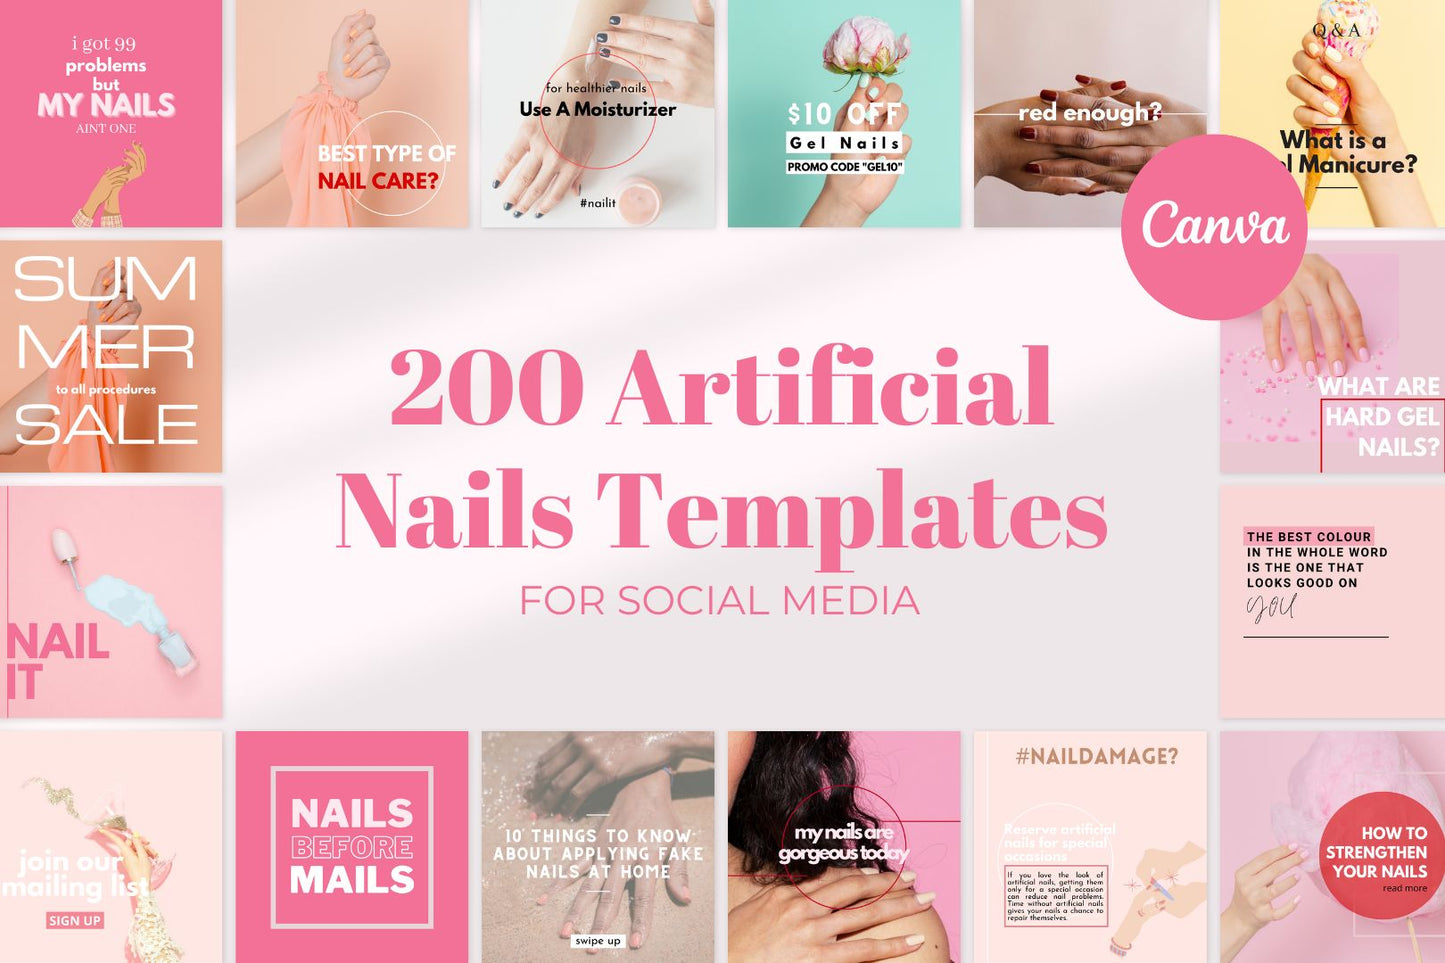 Nail techs template ready to use